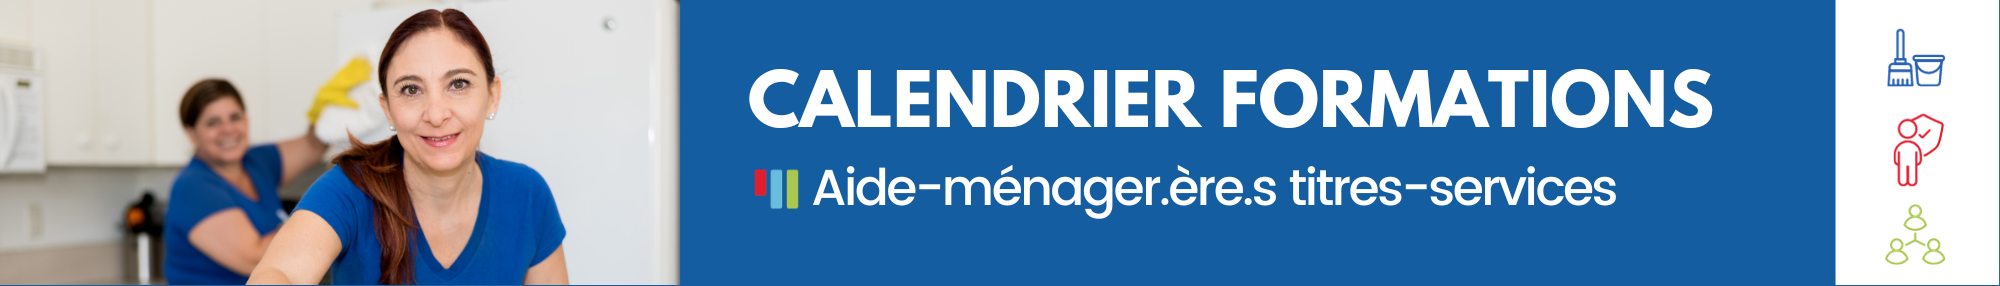 https://filedn.eu/lQIOnSg1YrfzKPKCwLOtD7Q/Images%20site%20web/Dendreo/calendrier%20formations%20aide%20menageres.png